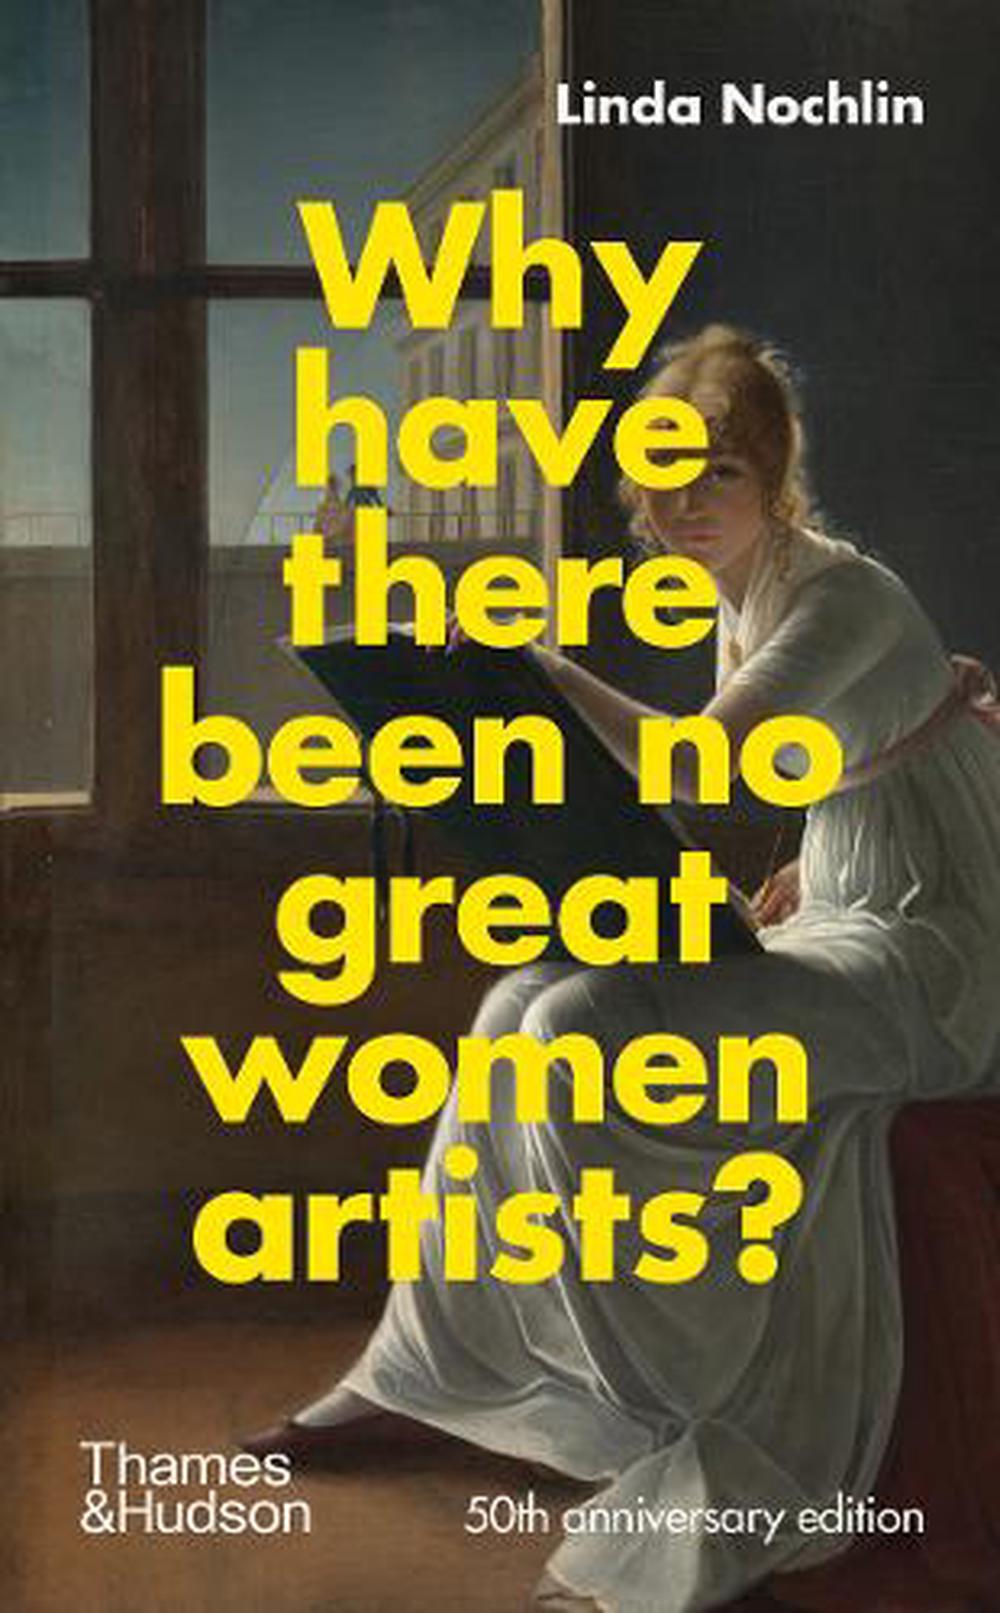 why have there been no great female artists linda nochlin